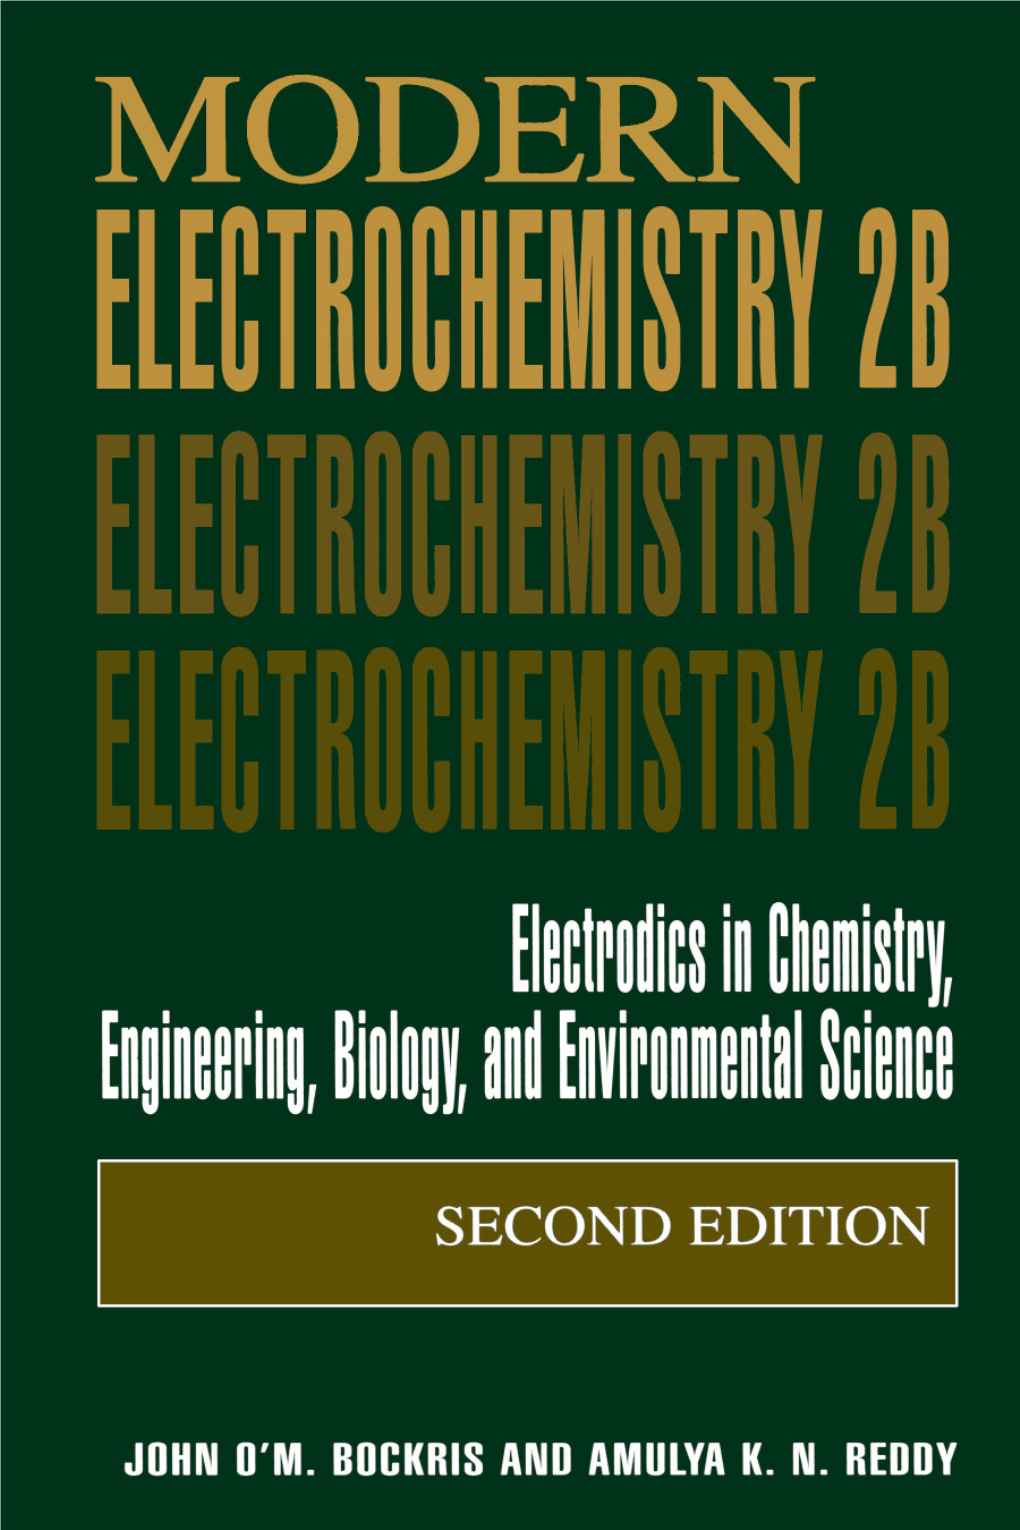 VOLUME 2B MODERN ELECTROCHEMISTRY SECOND EDITION Electrodics in Chemistry, Engineering, Biology, and Environmental Science